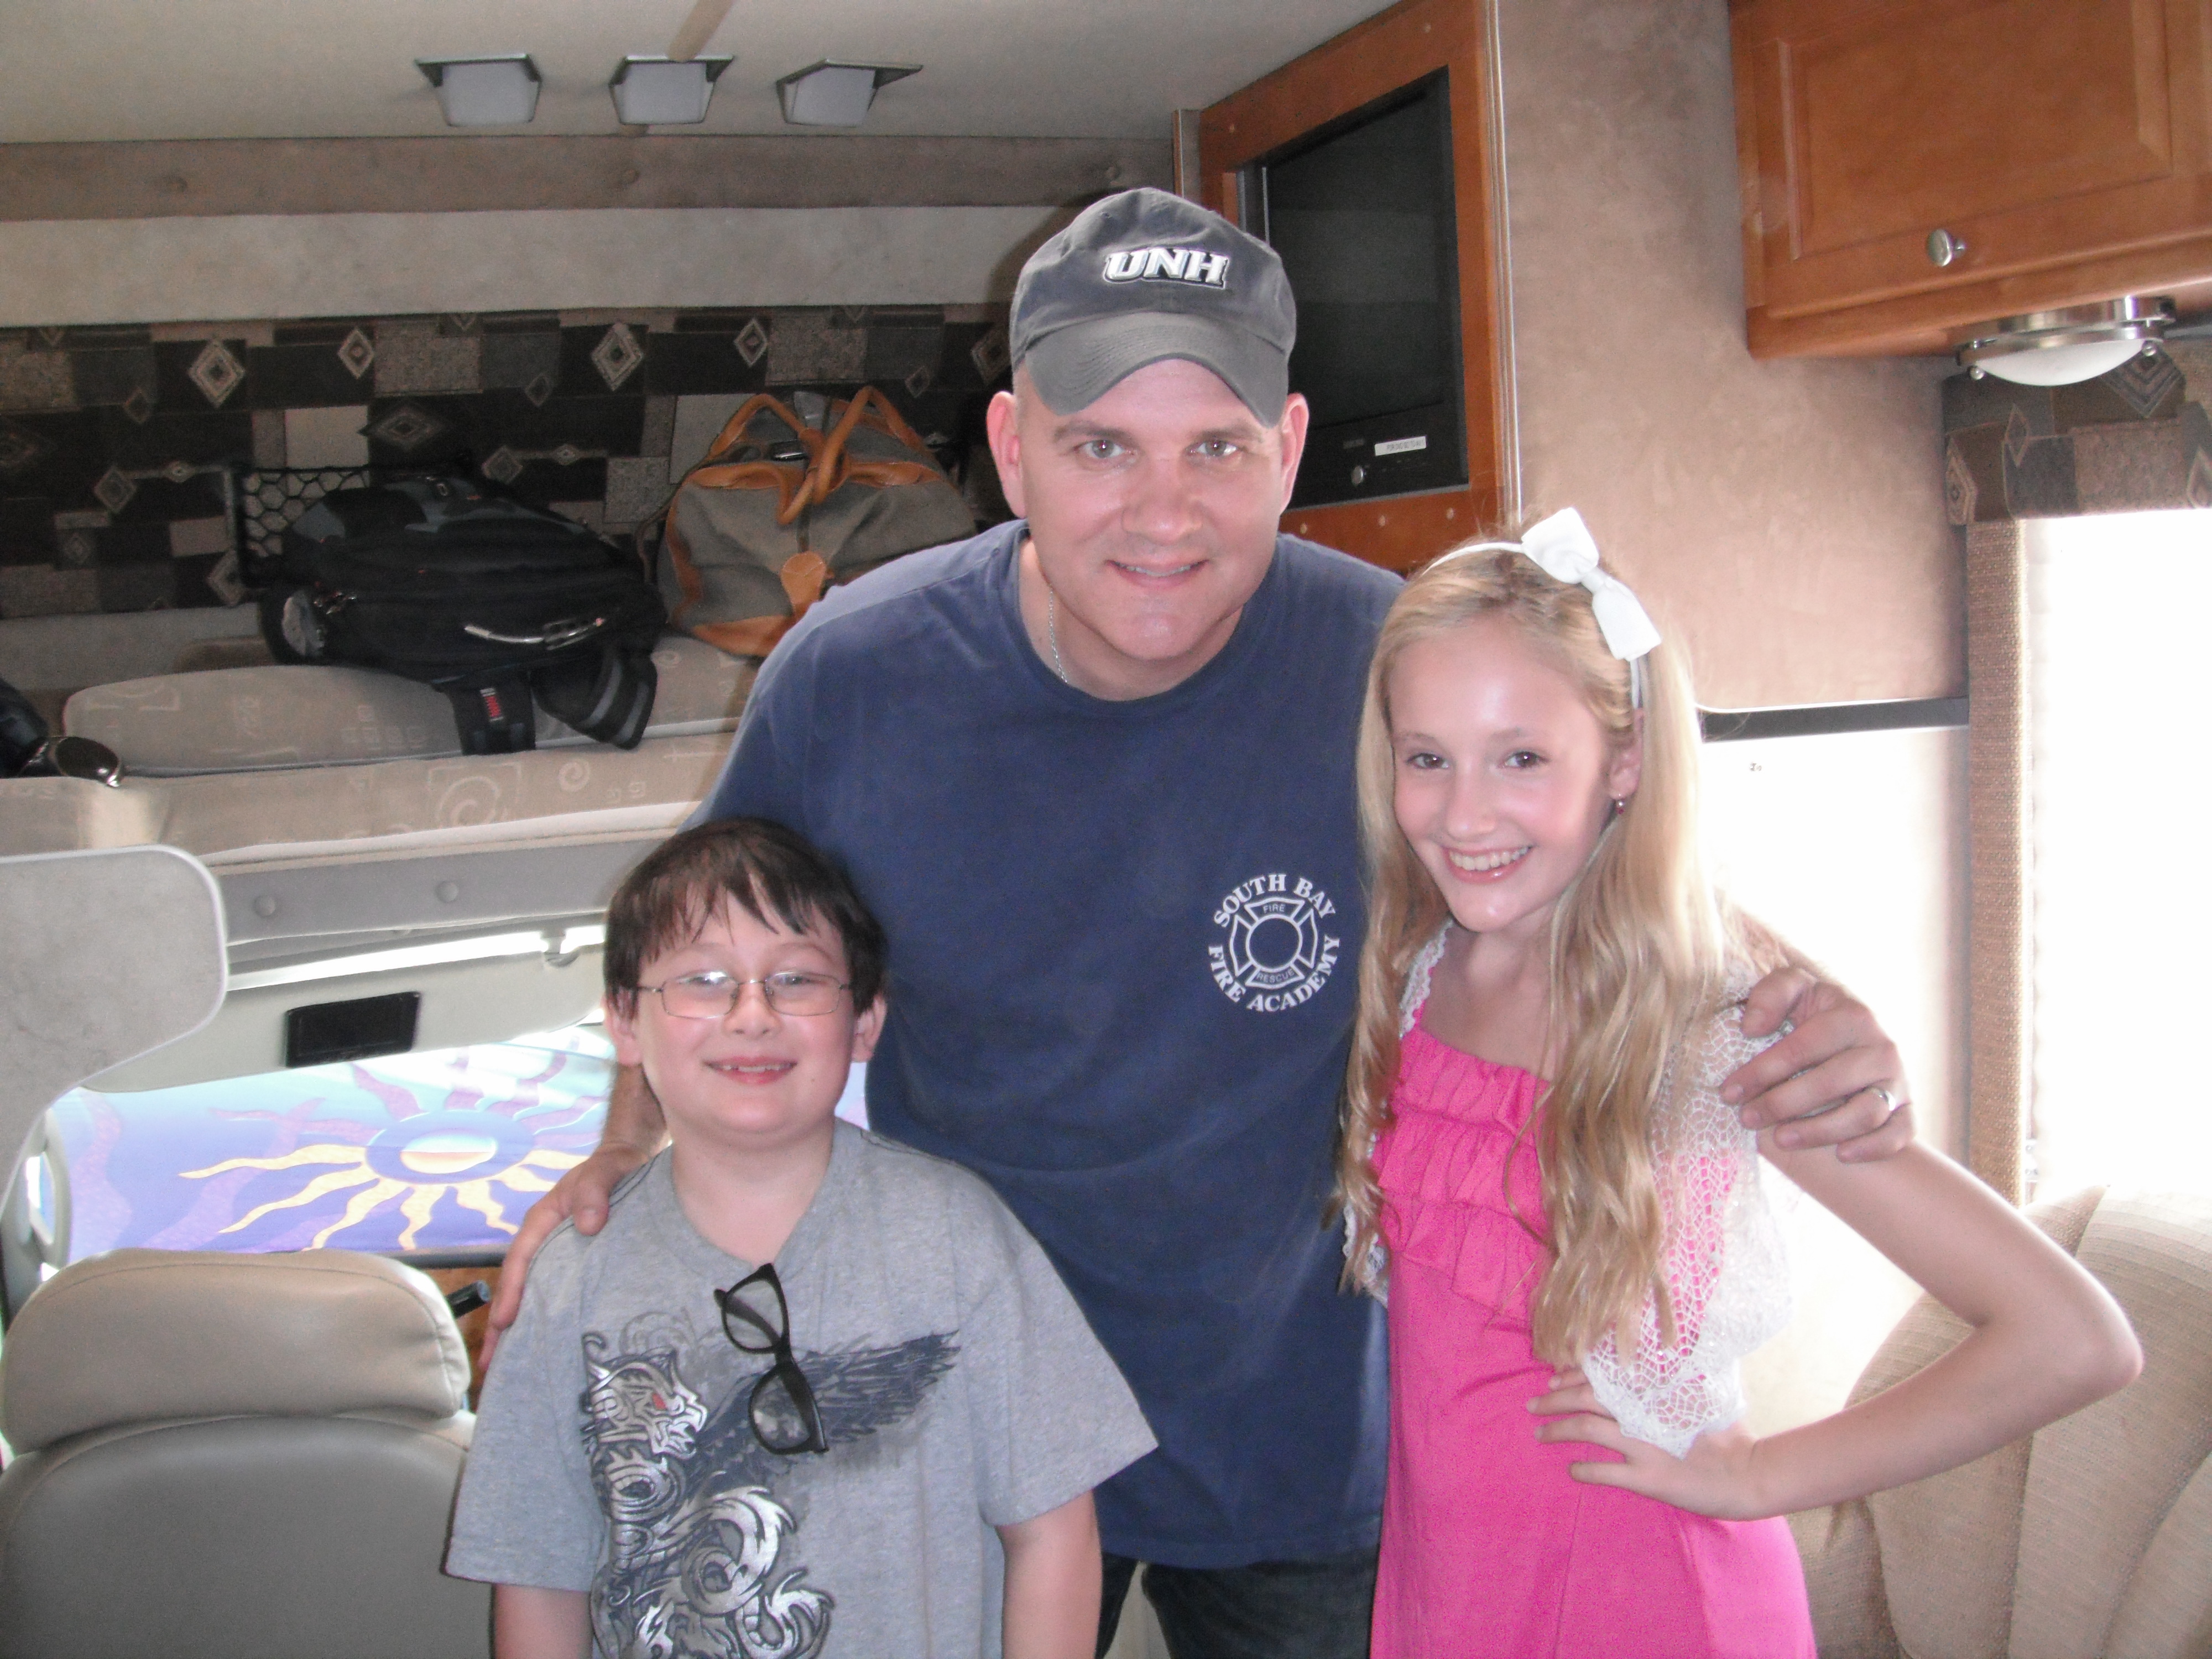 Me, with actor: Mike O'Malley (GLEE) and actress: Athena Ripka, in our dressing room trailer, on location filming 